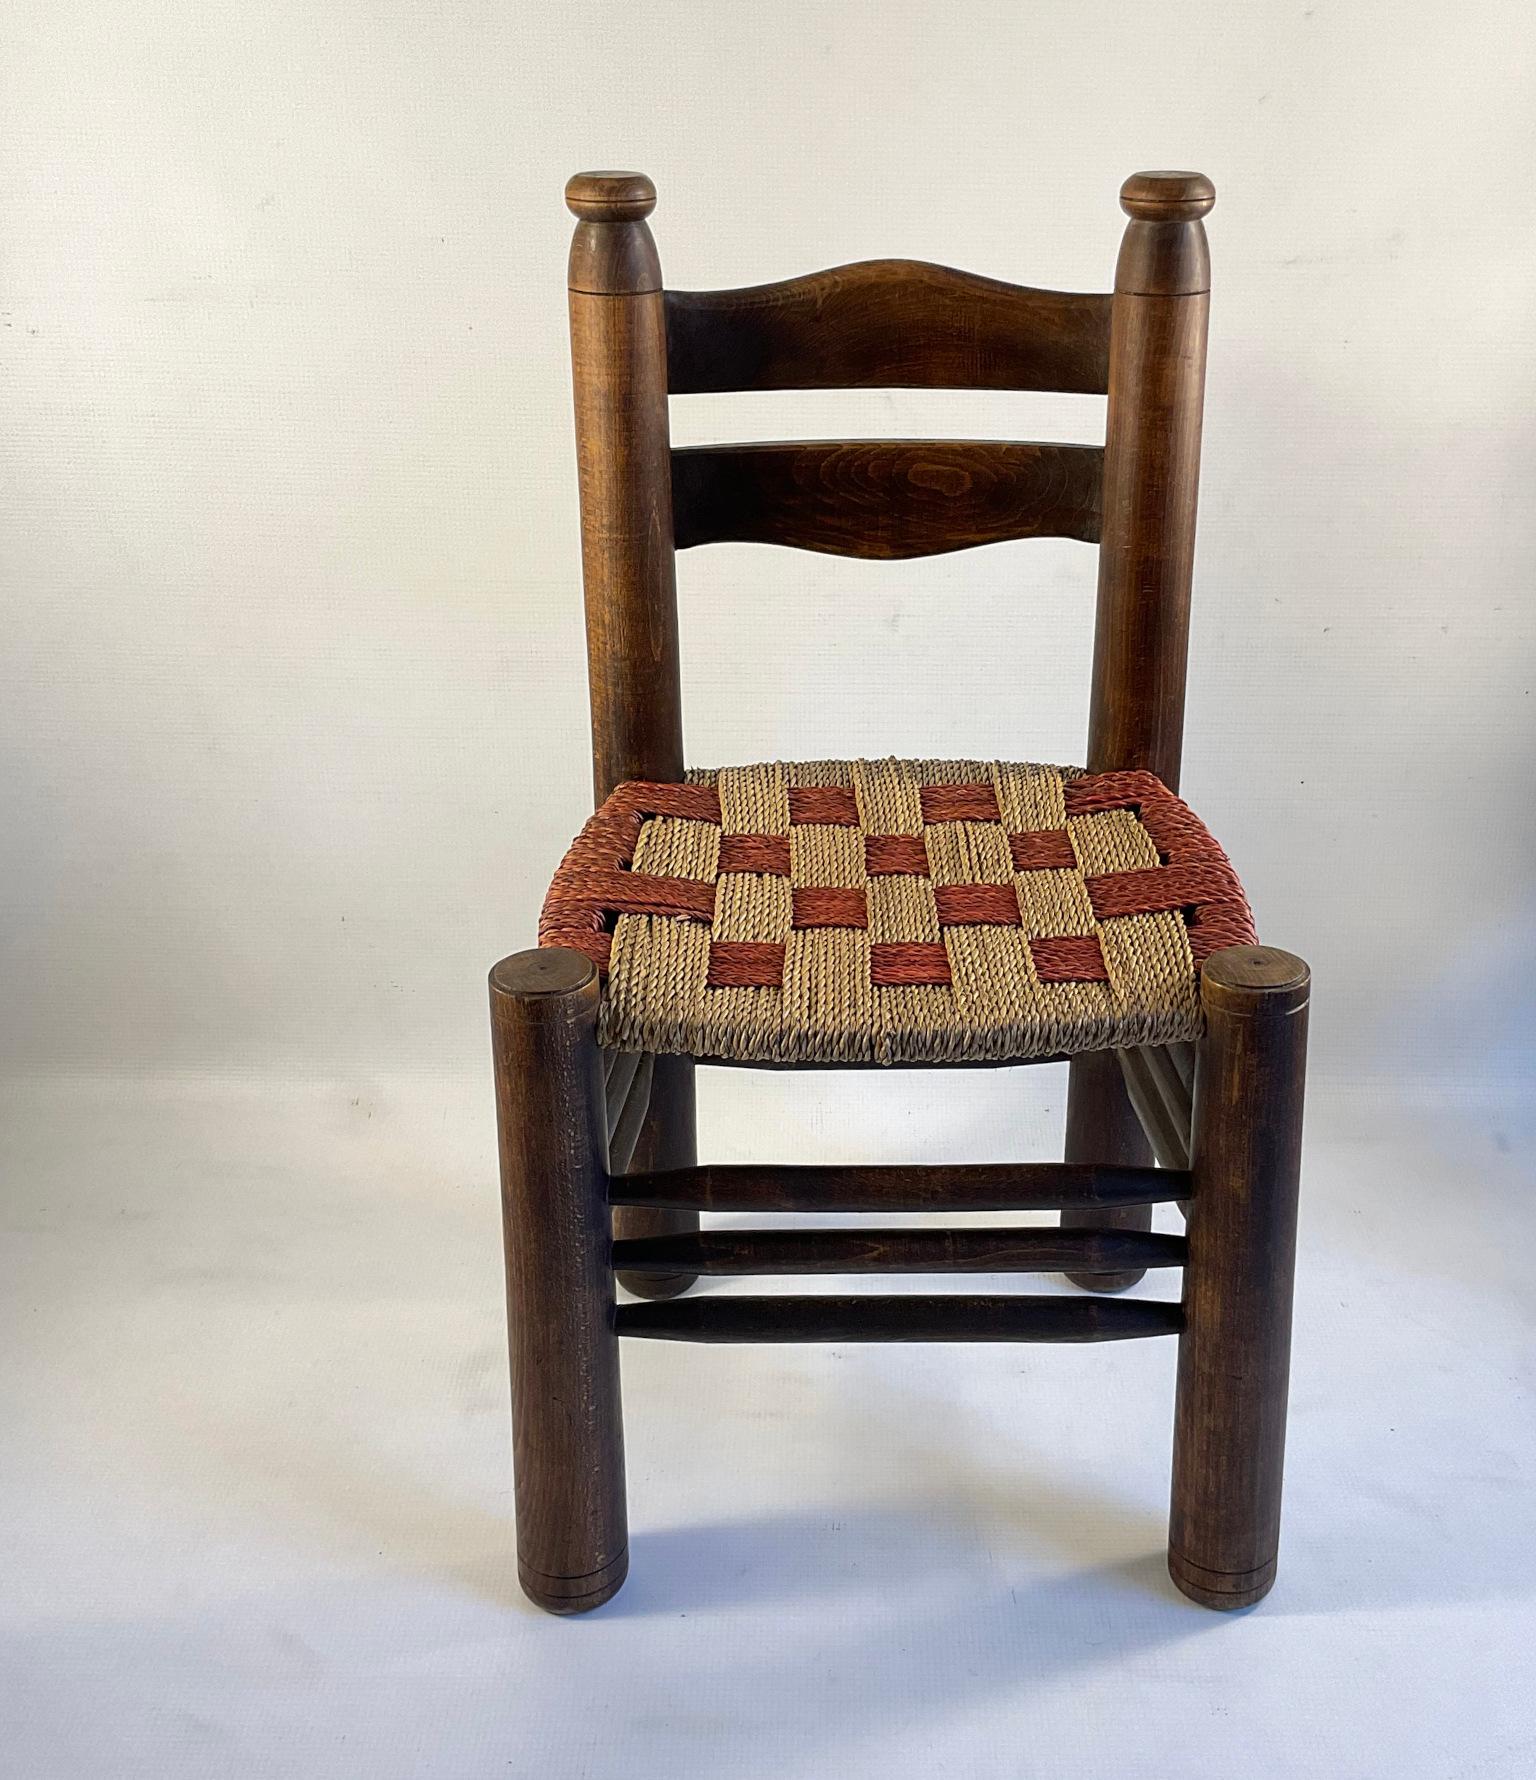 Single rustic dining chair by Charles Dudouyt with a unique two-tone red and natural rush weave.

